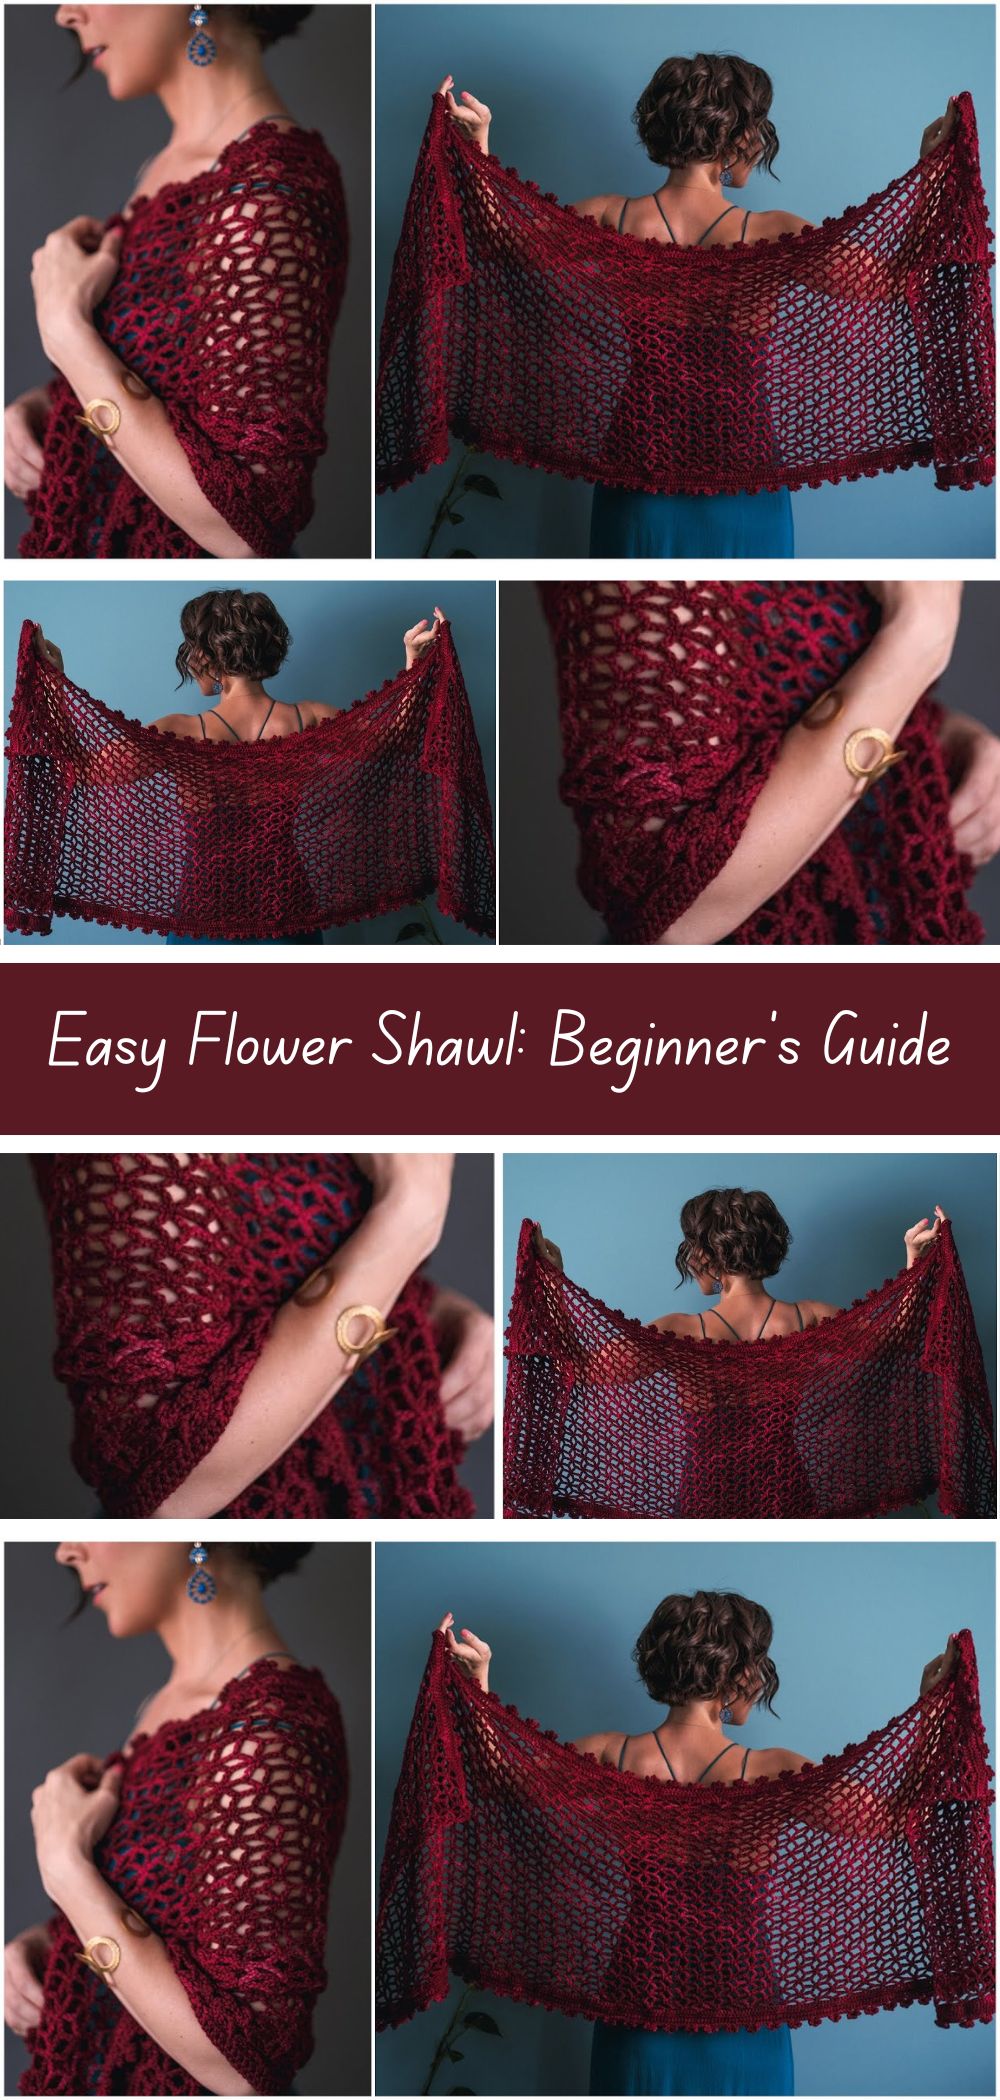 Quick Crochet Flower Shawl Tutorial - Learn to crochet a charming flower shawl quickly with this easy-to-follow guide